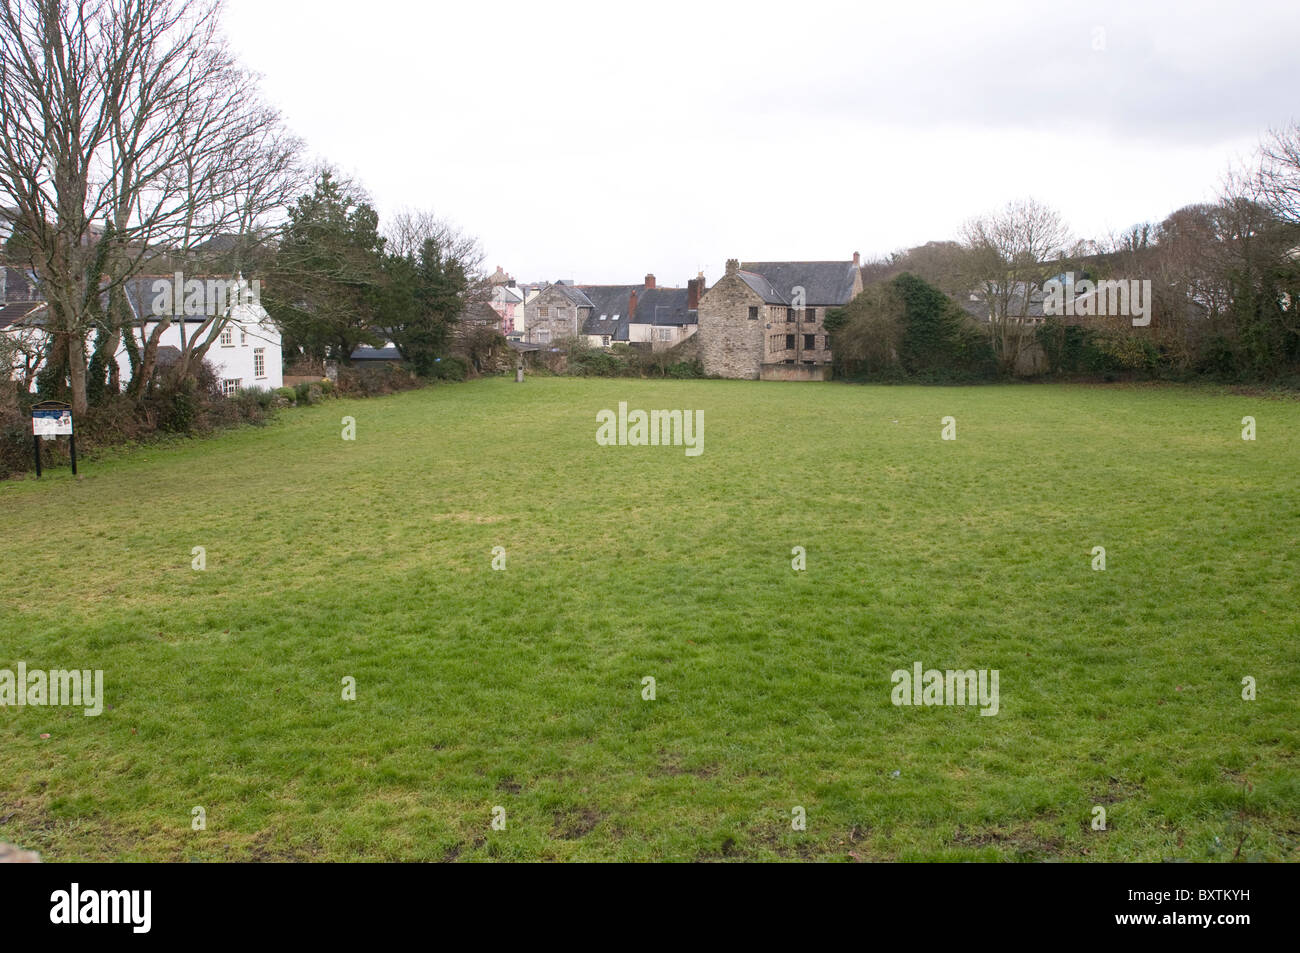 The site of Glasney College founded in 1265 in Penryn, Cornwall Stock Photo